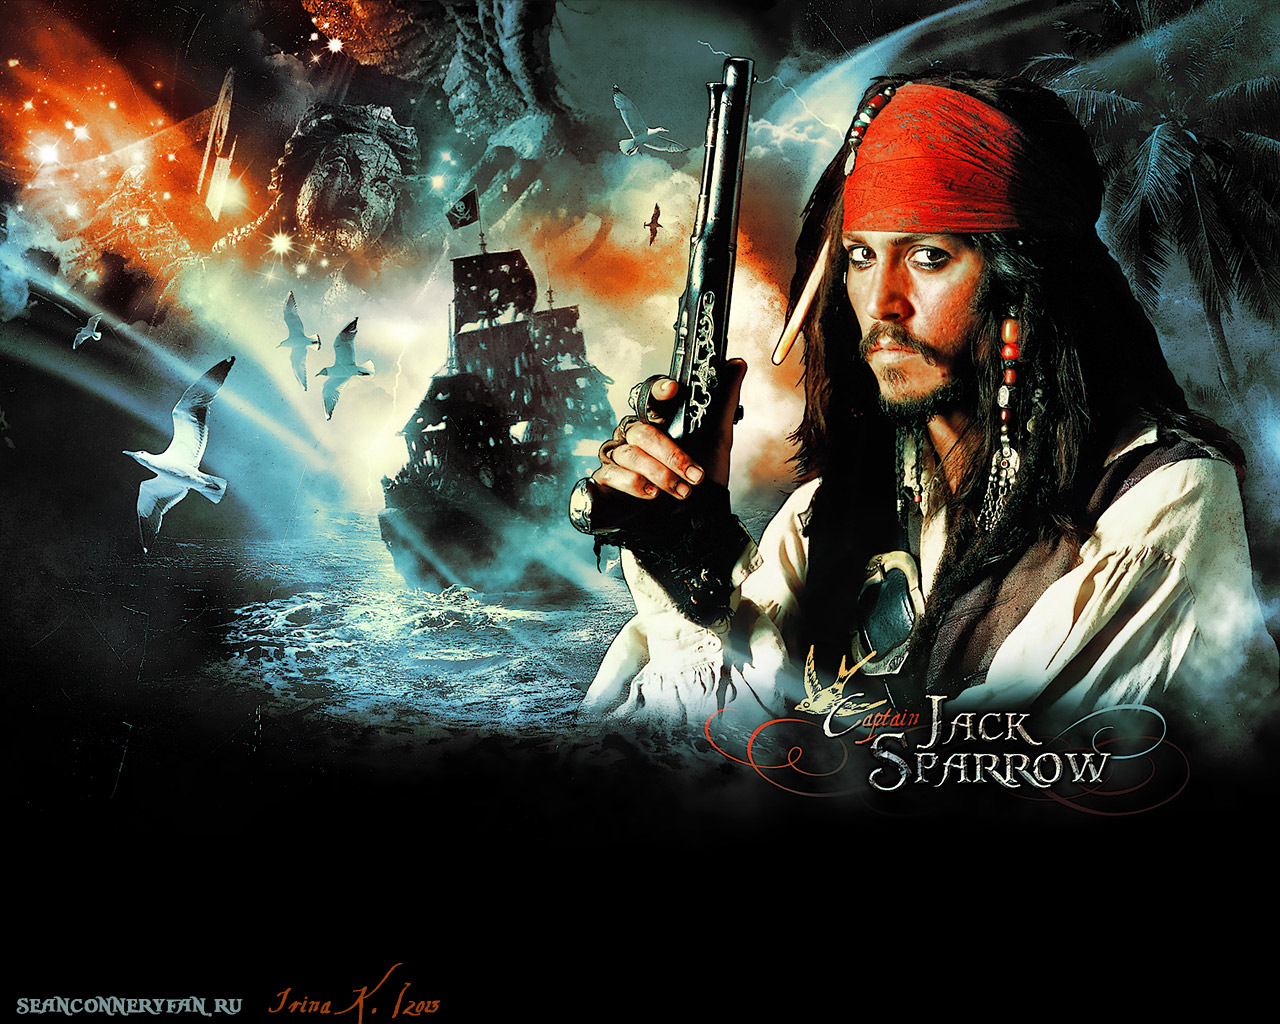   .    (Pirates of the Caribbean. The Curse of the Black Pearl).   (Johnny Depp)  Wallpaper